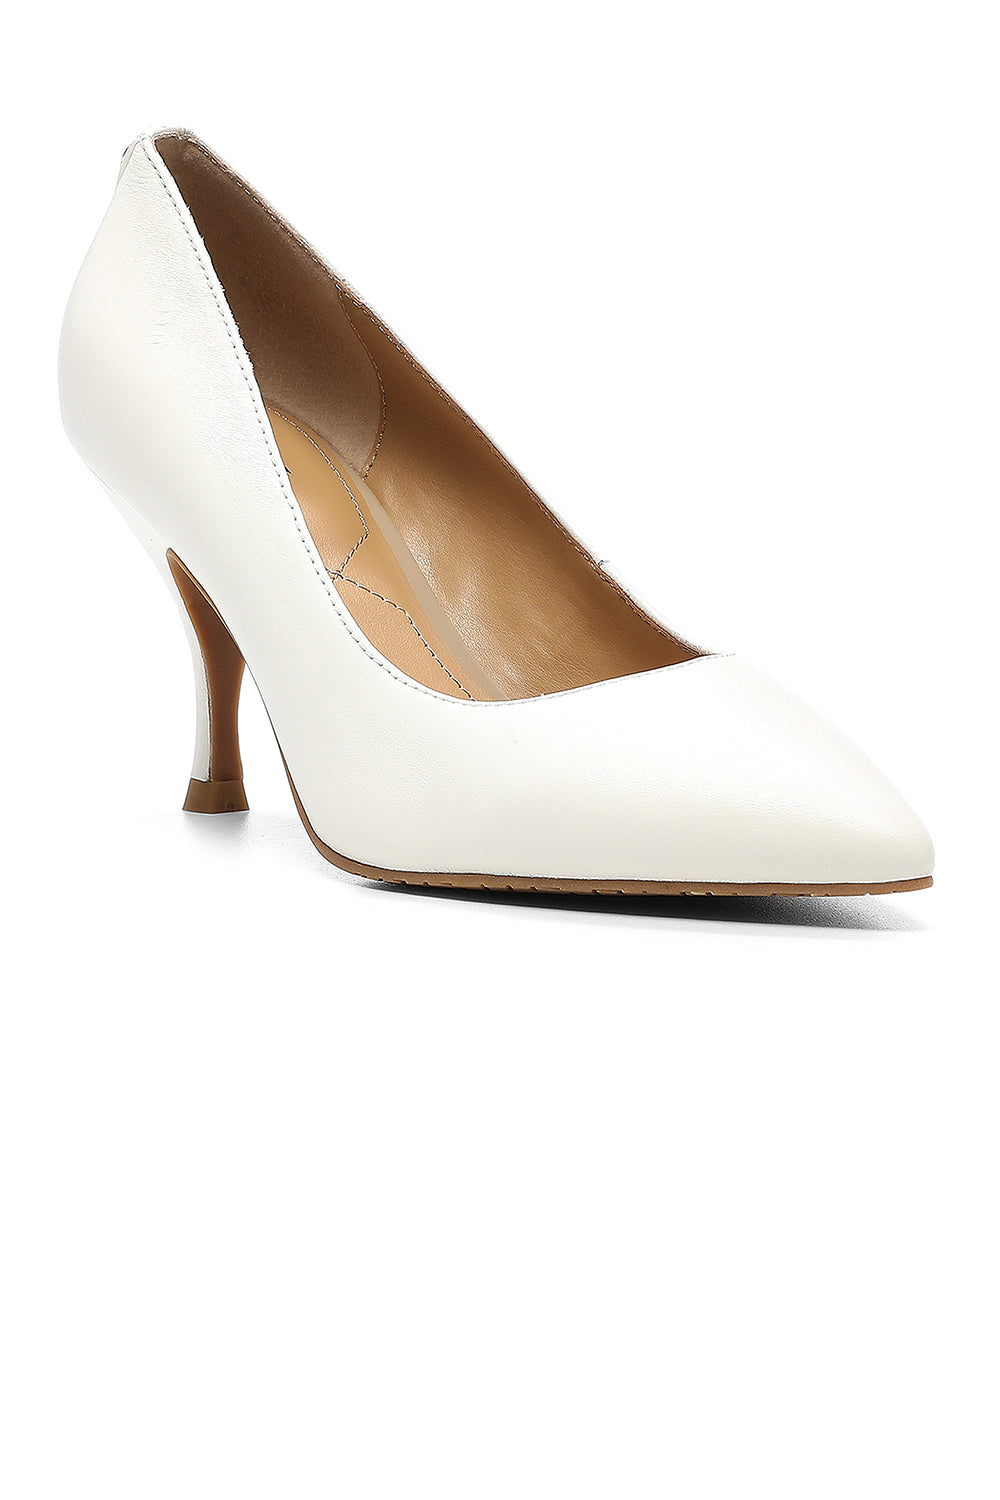 NYDJ Evie Pumps In Nappa Leather - Off White